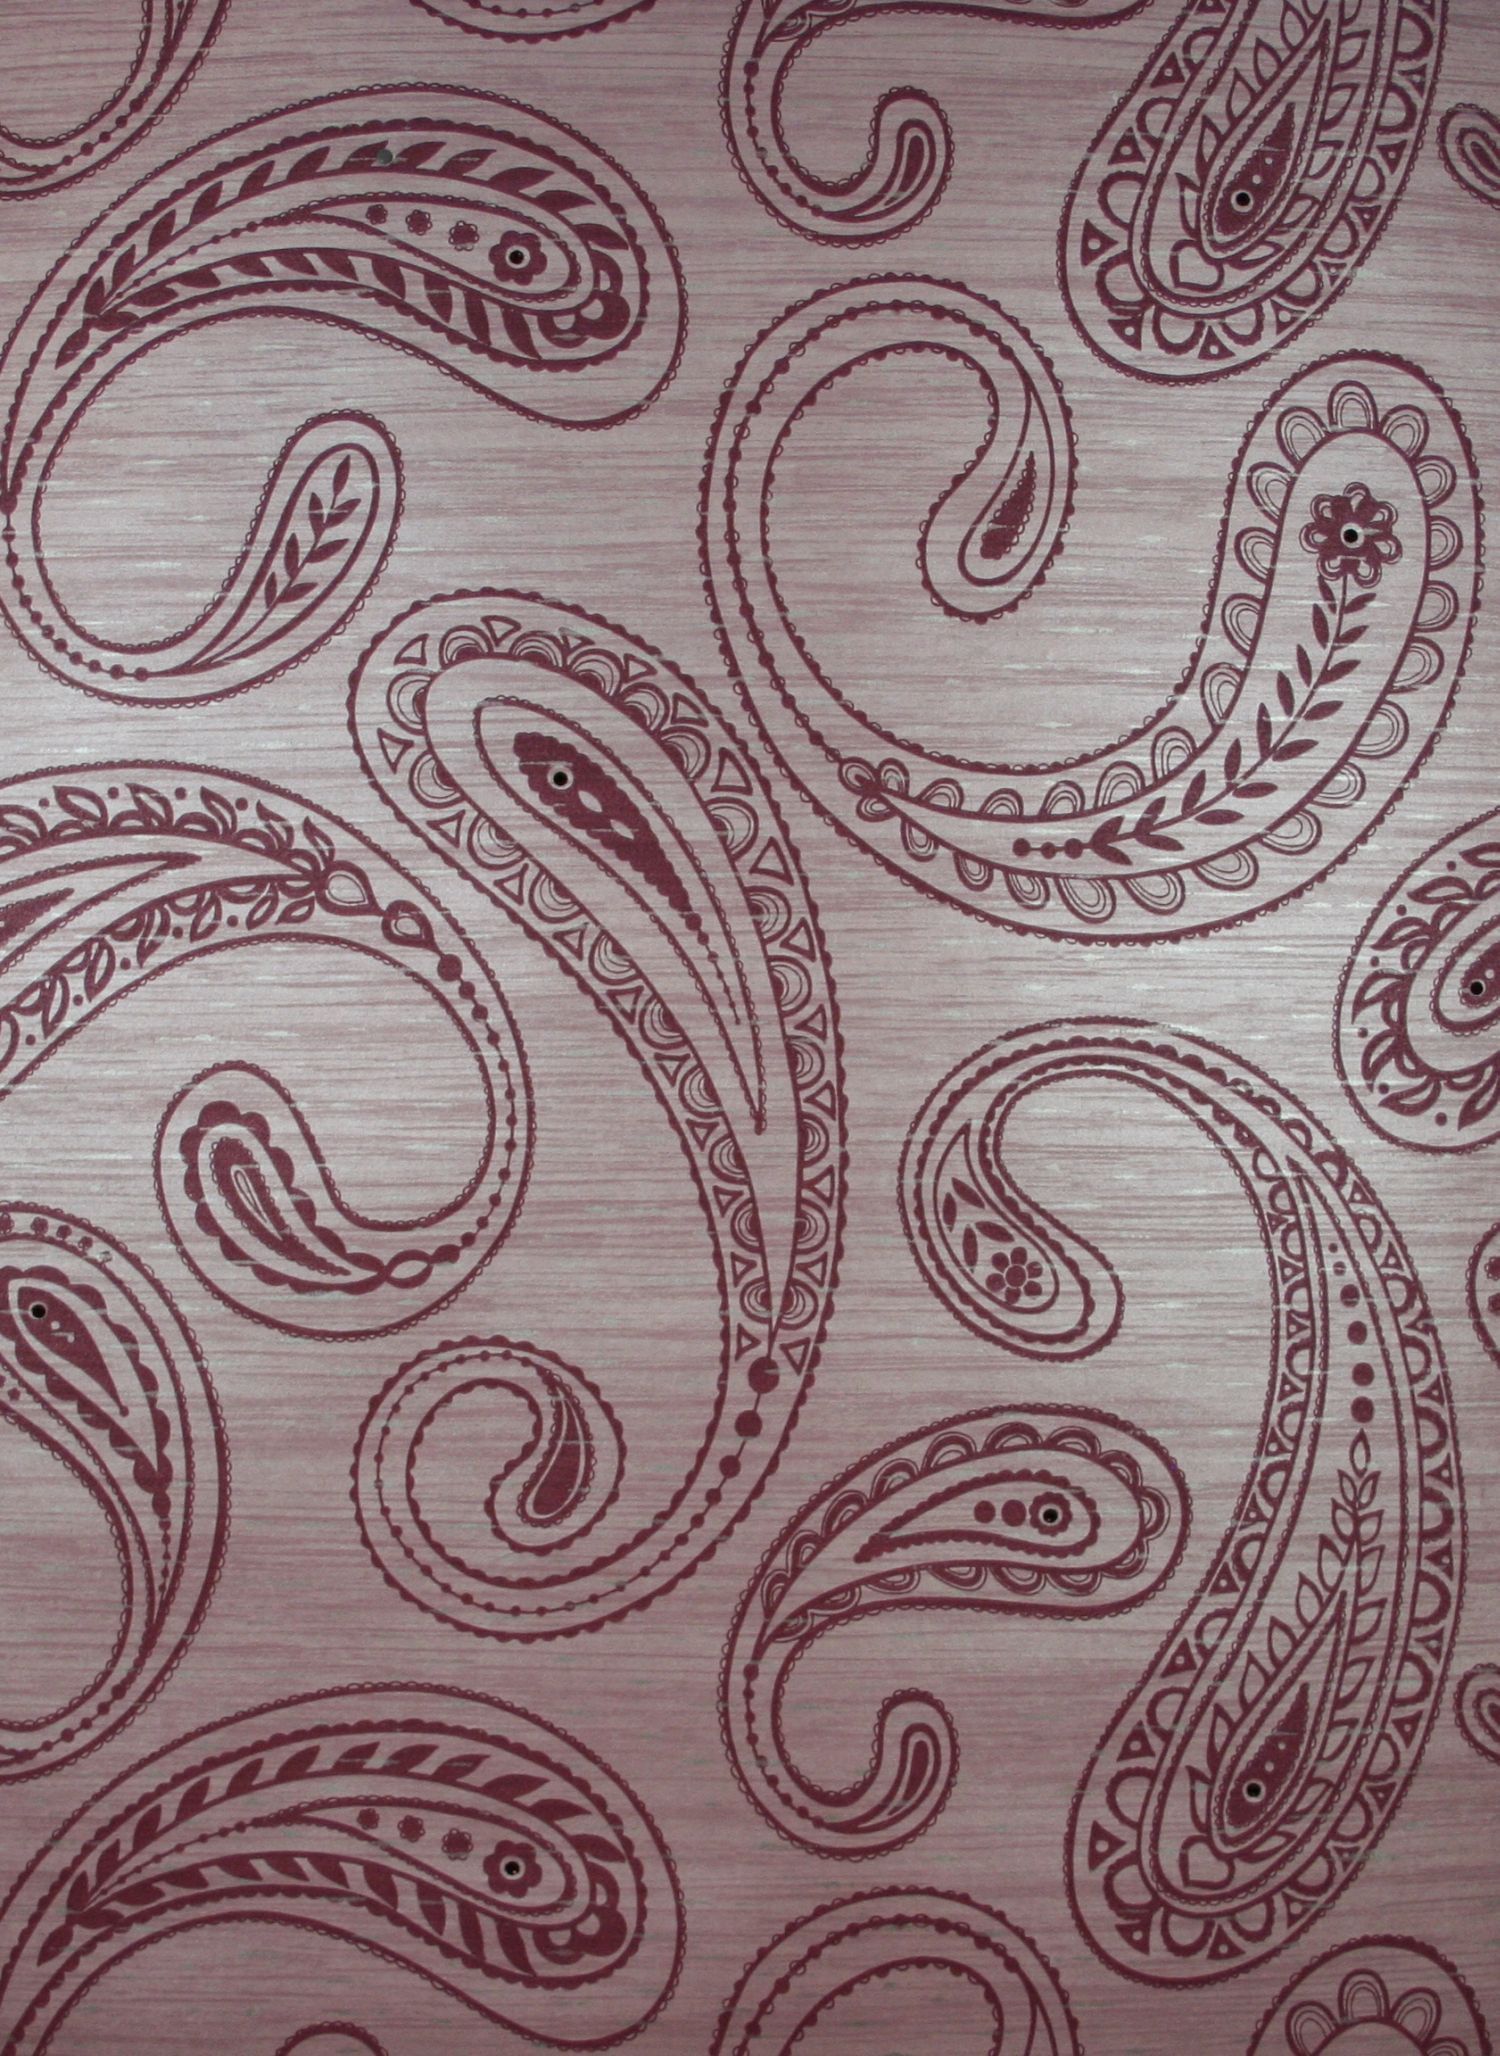 Ipad Images Of Pink Paisley By Primo Gitthouse - Paisley Wallpaper Grey Pink , HD Wallpaper & Backgrounds